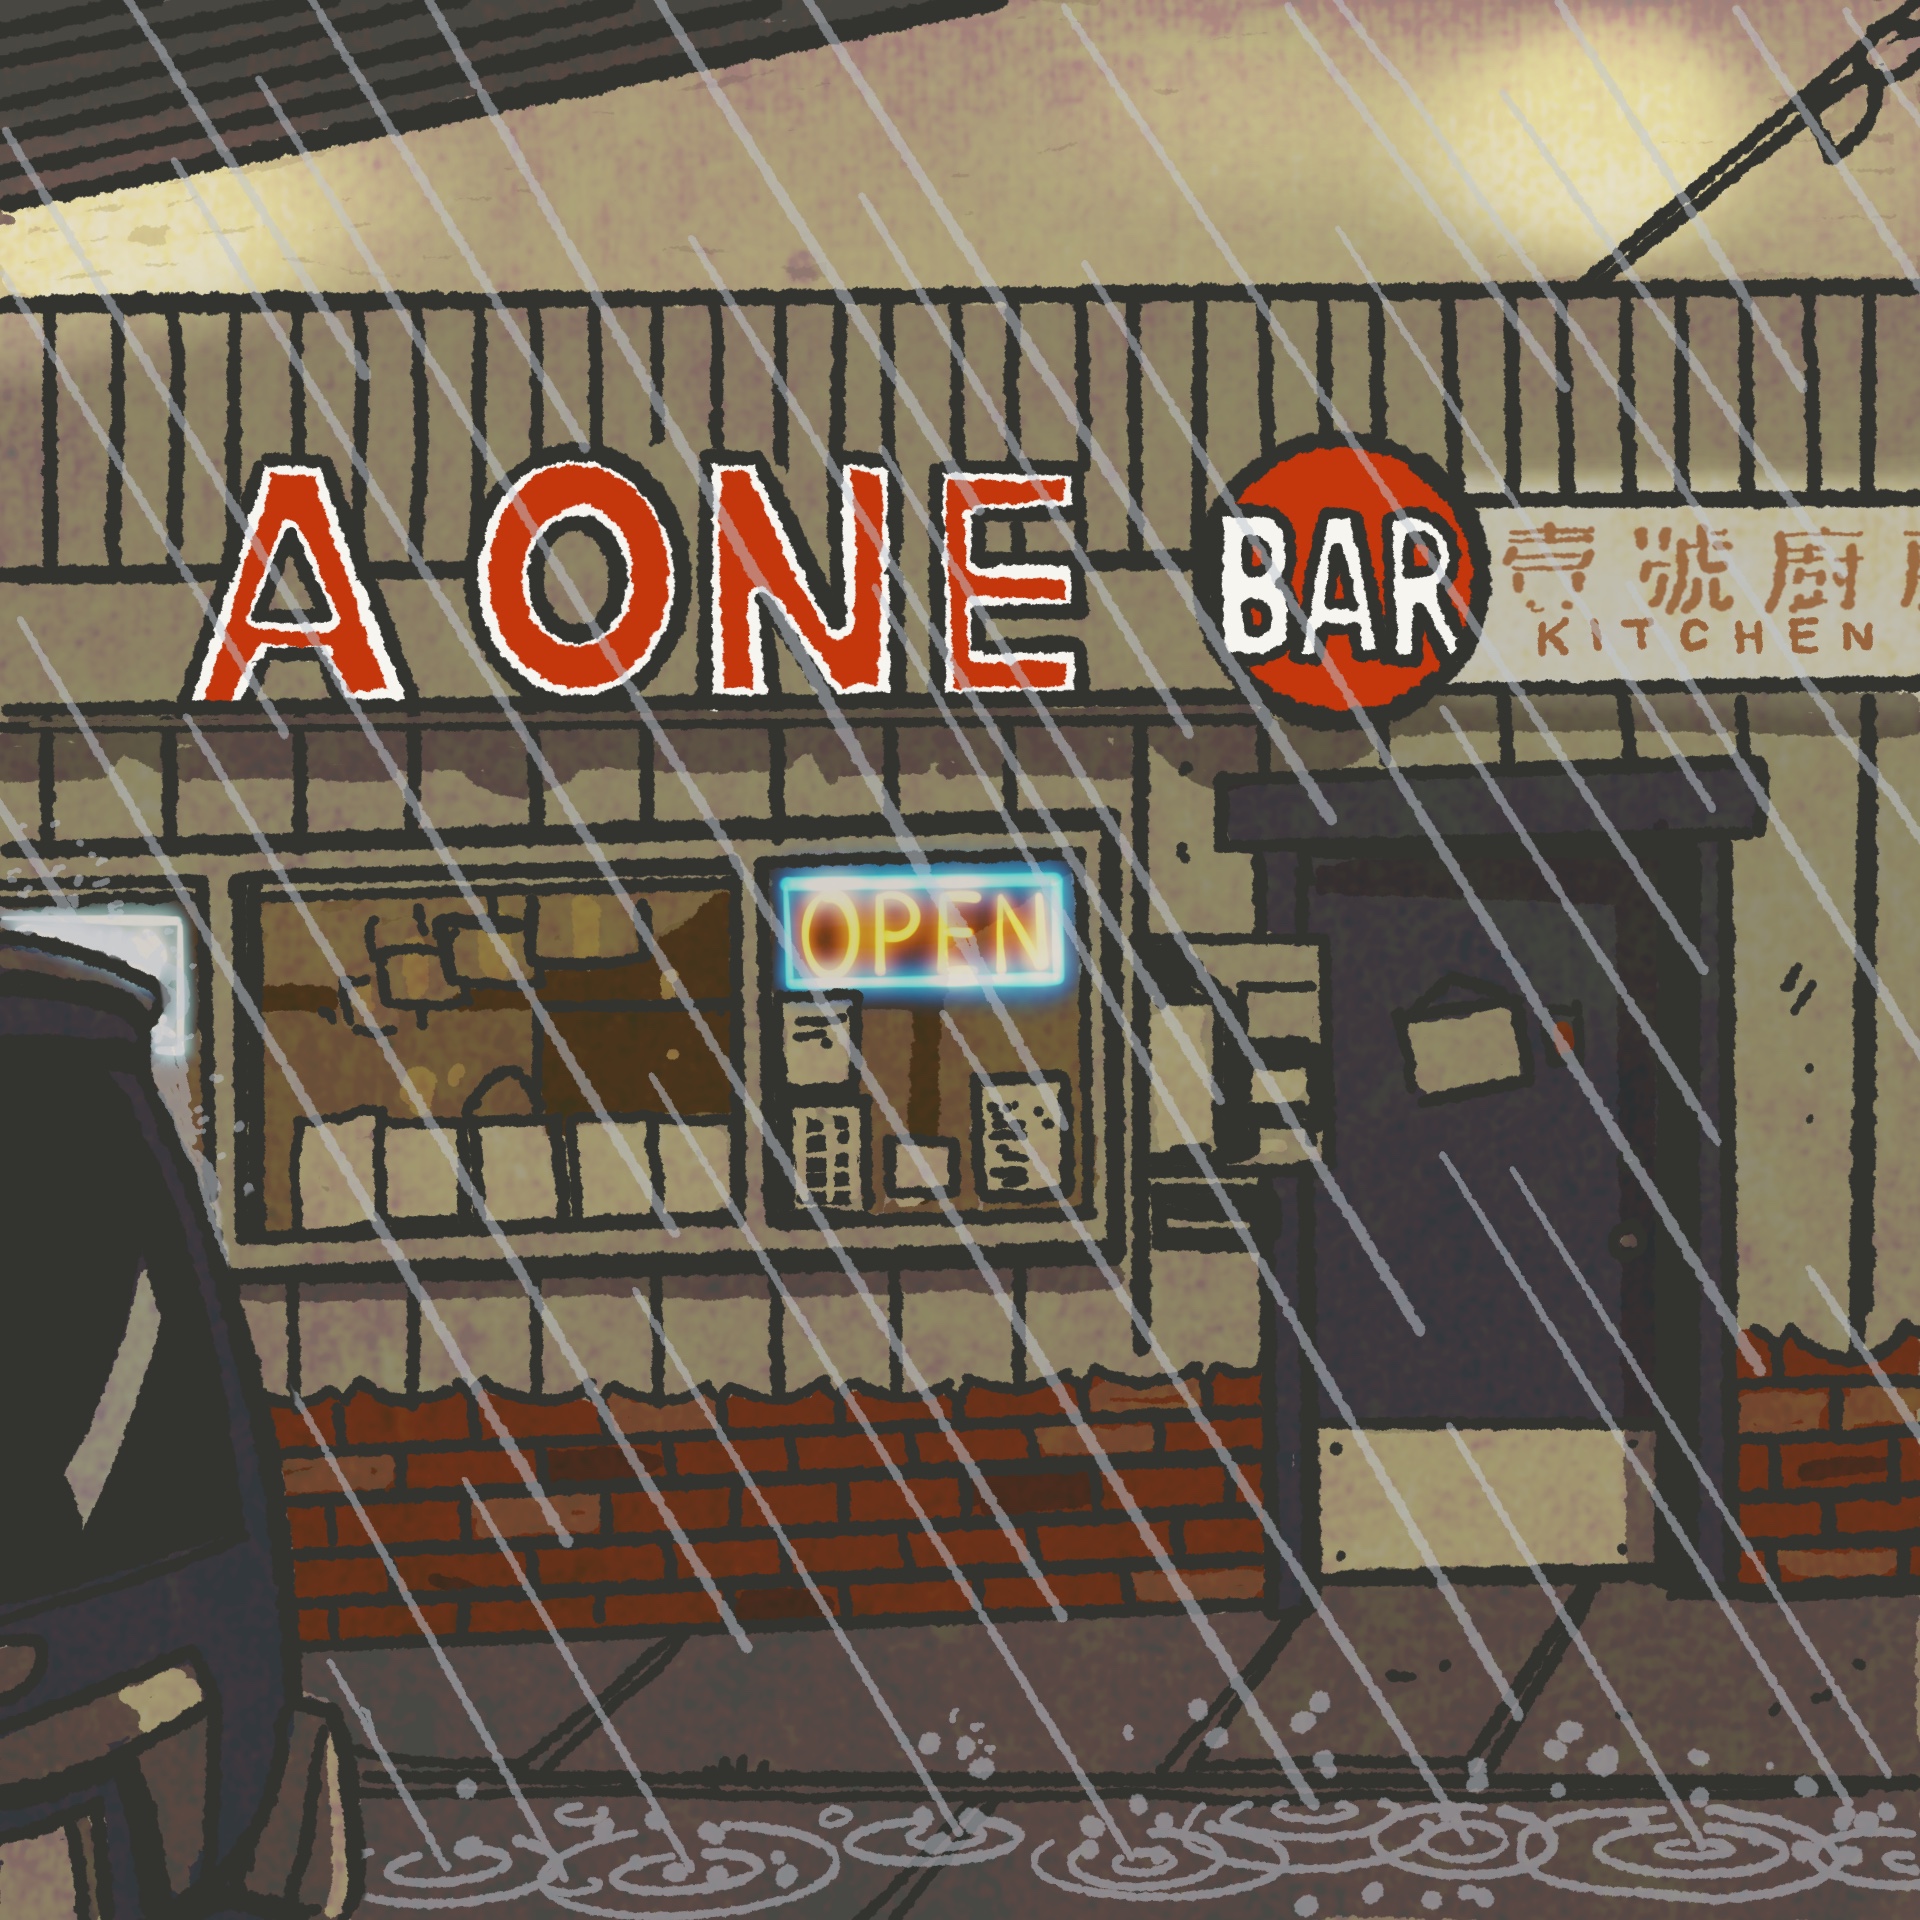 Illustration of the exterior of a restaurant on a rainy day. The sign reads, "A-ONE BAR"